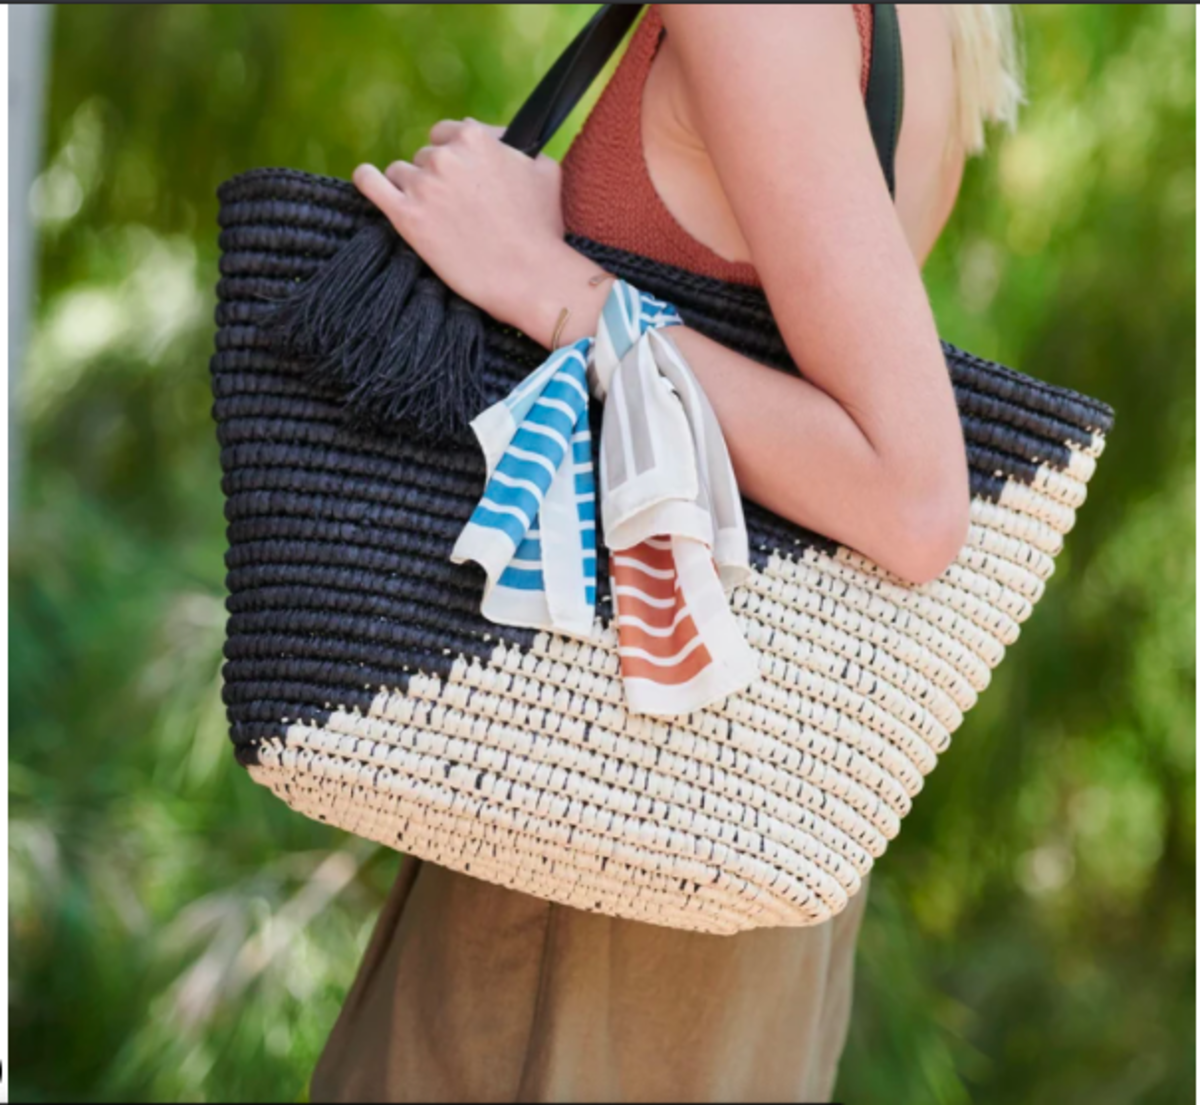 The Best Straw Bags For Summer - an indigo day - Lifestyle Blog